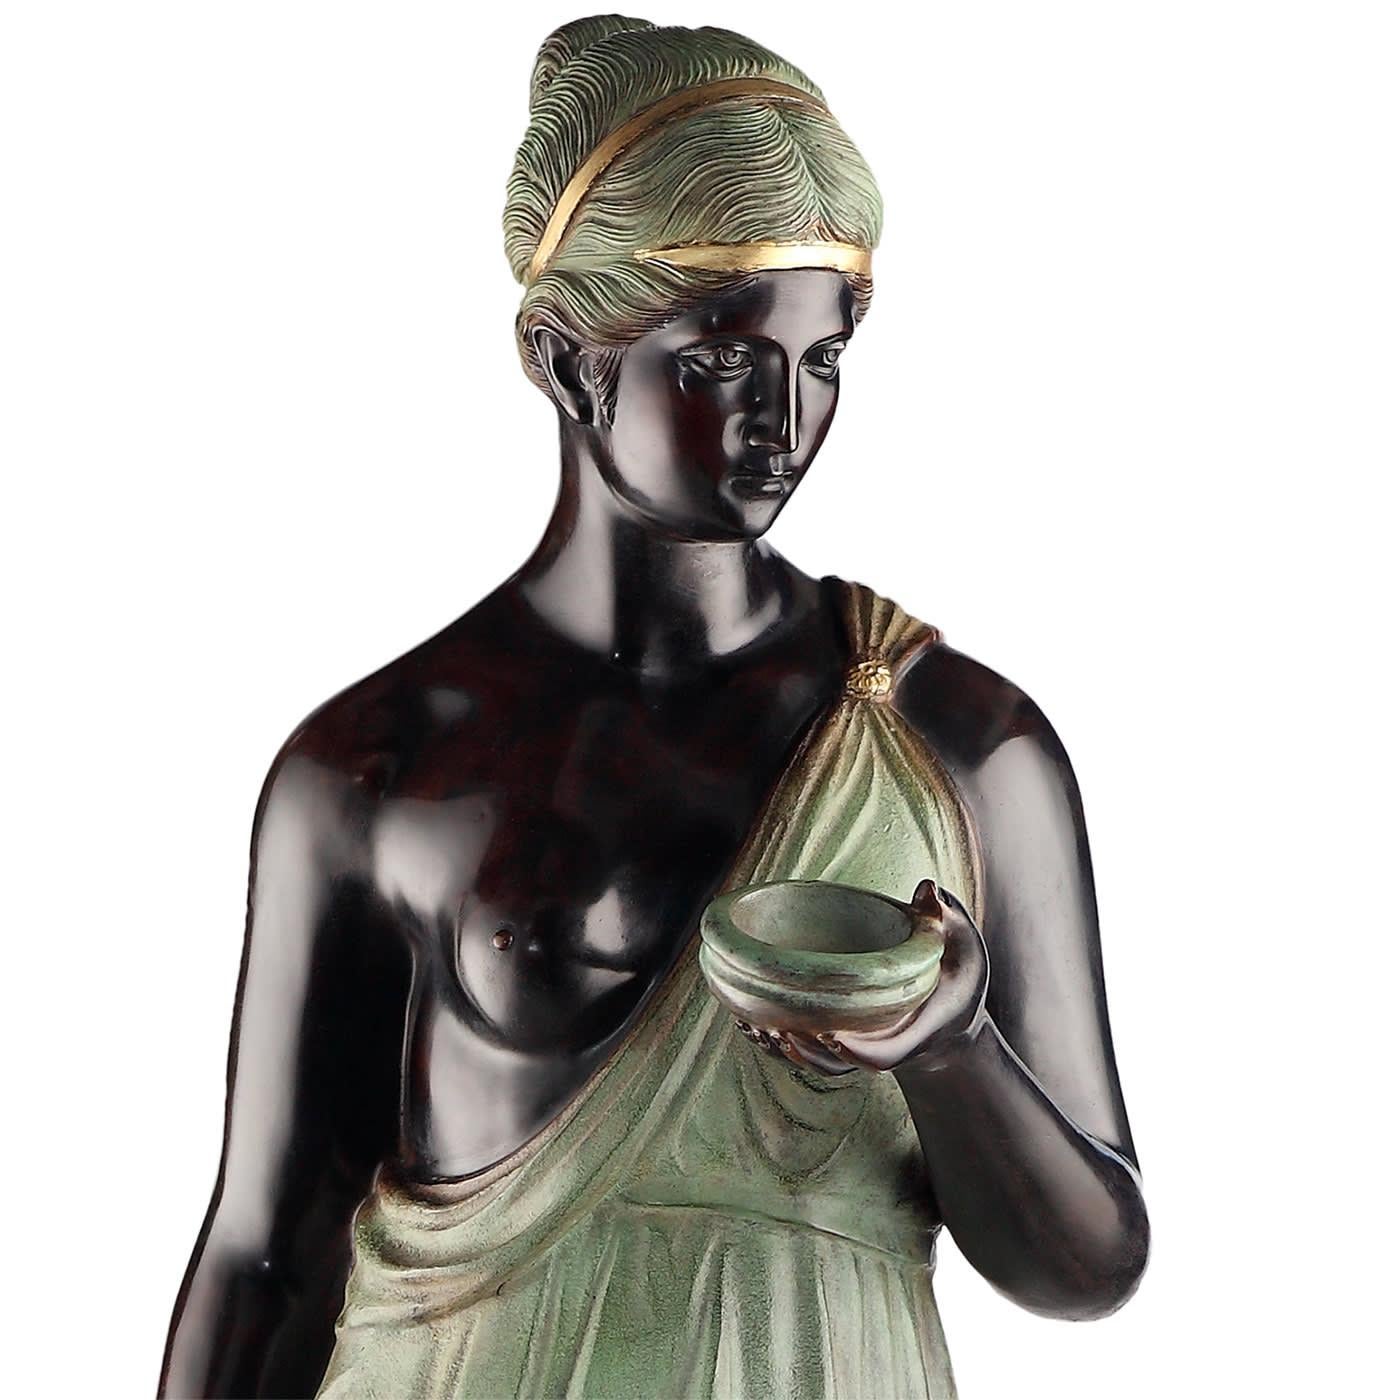 Crafted of bronze using the lost wax casting technique, this sumptuous statue echoes the glory of the ancient Greek myths reinterpreting them with a contemporary sensibility. A black Hebe - goddess of youth and cupbearer to the gods - is depicted